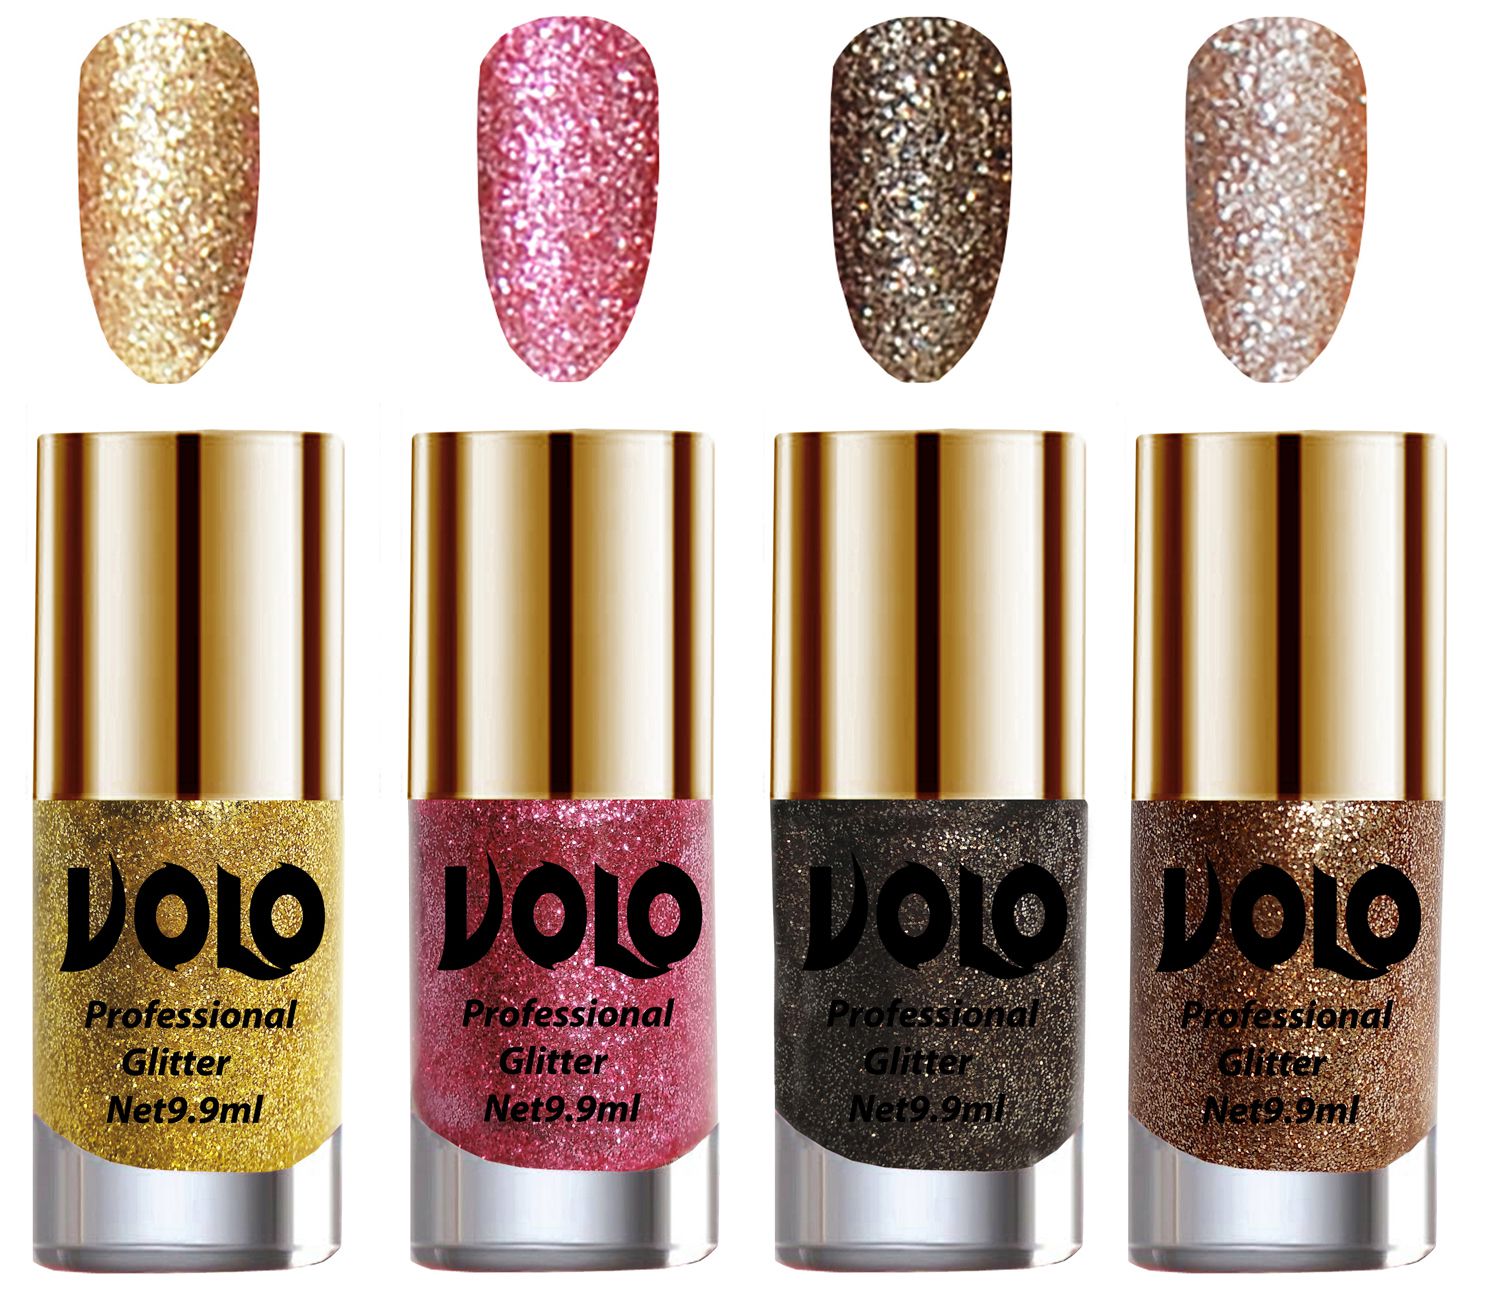     			VOLO Professionally Used Glitter Shine Nail Polish Gold,Pink,Grey Gold Pack of 4 39 mL